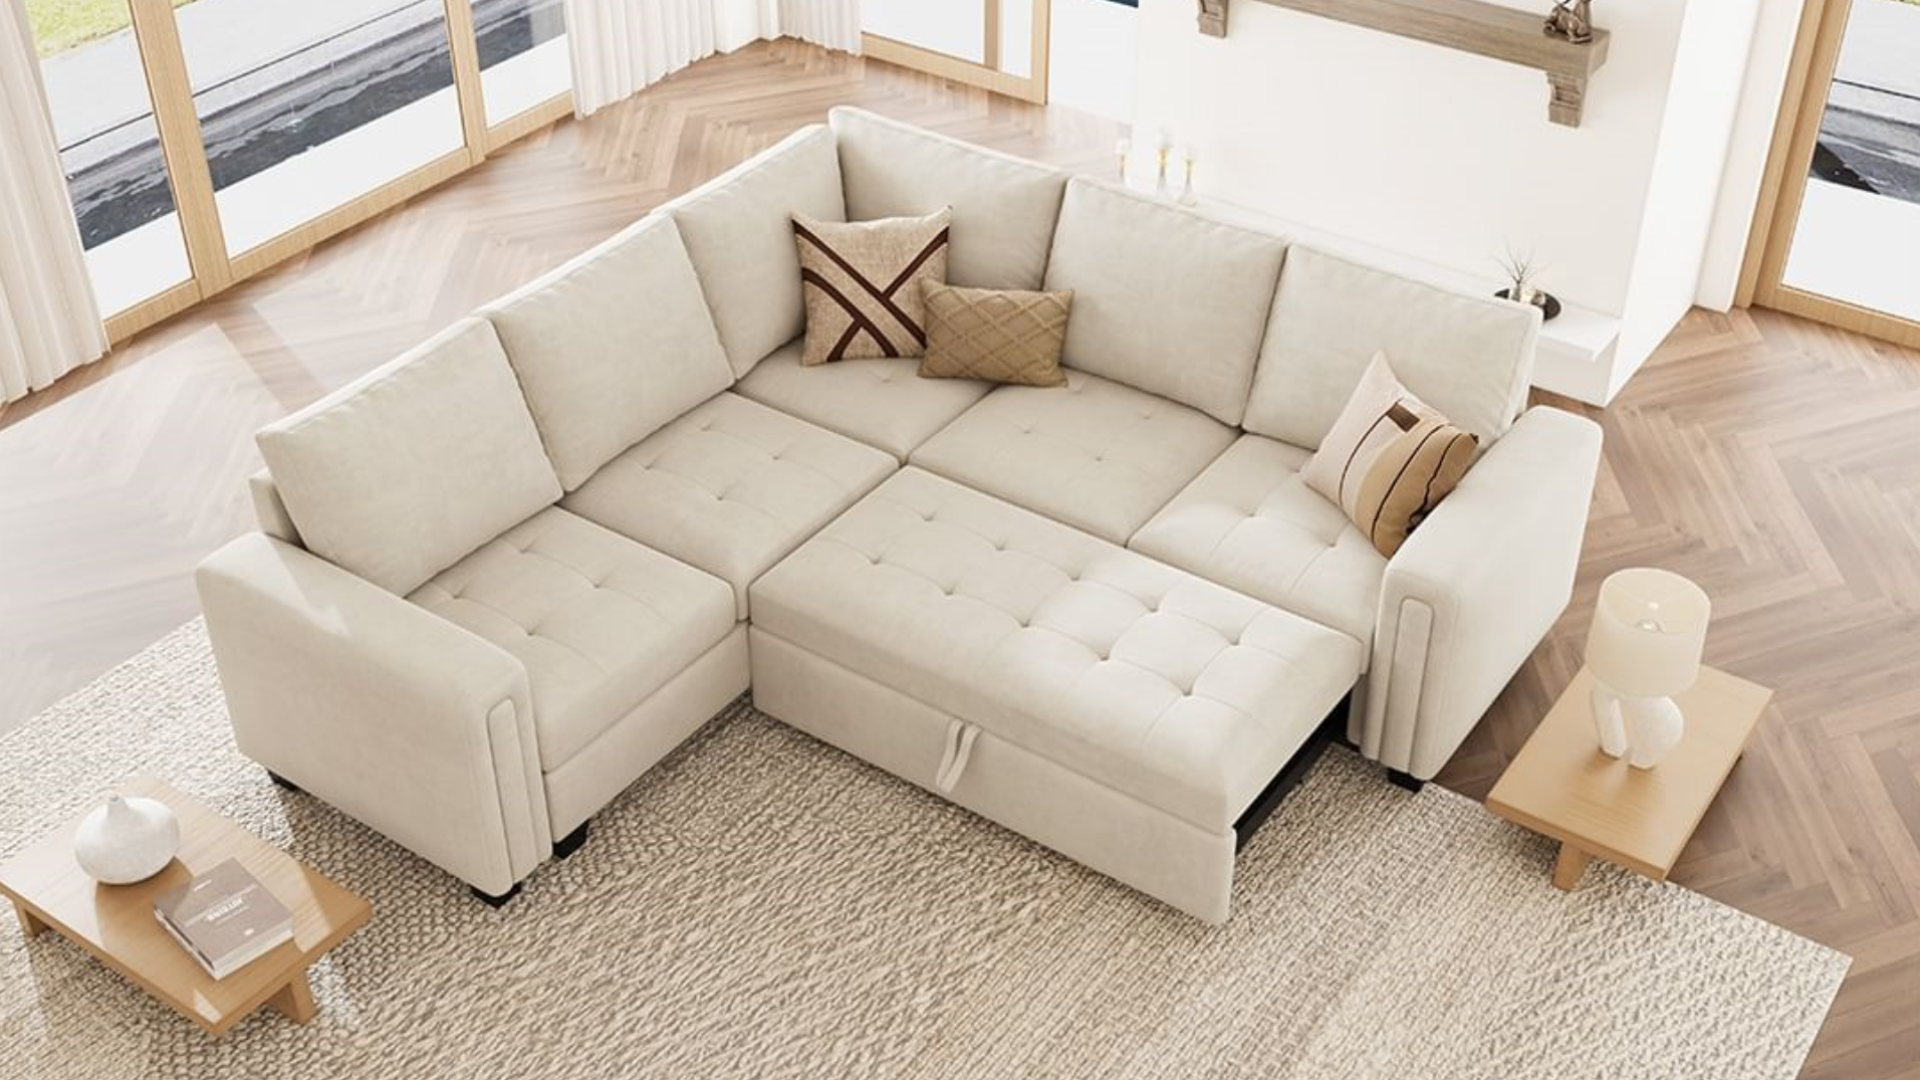 How To Choose The Right Modular Sofa For Your Home?